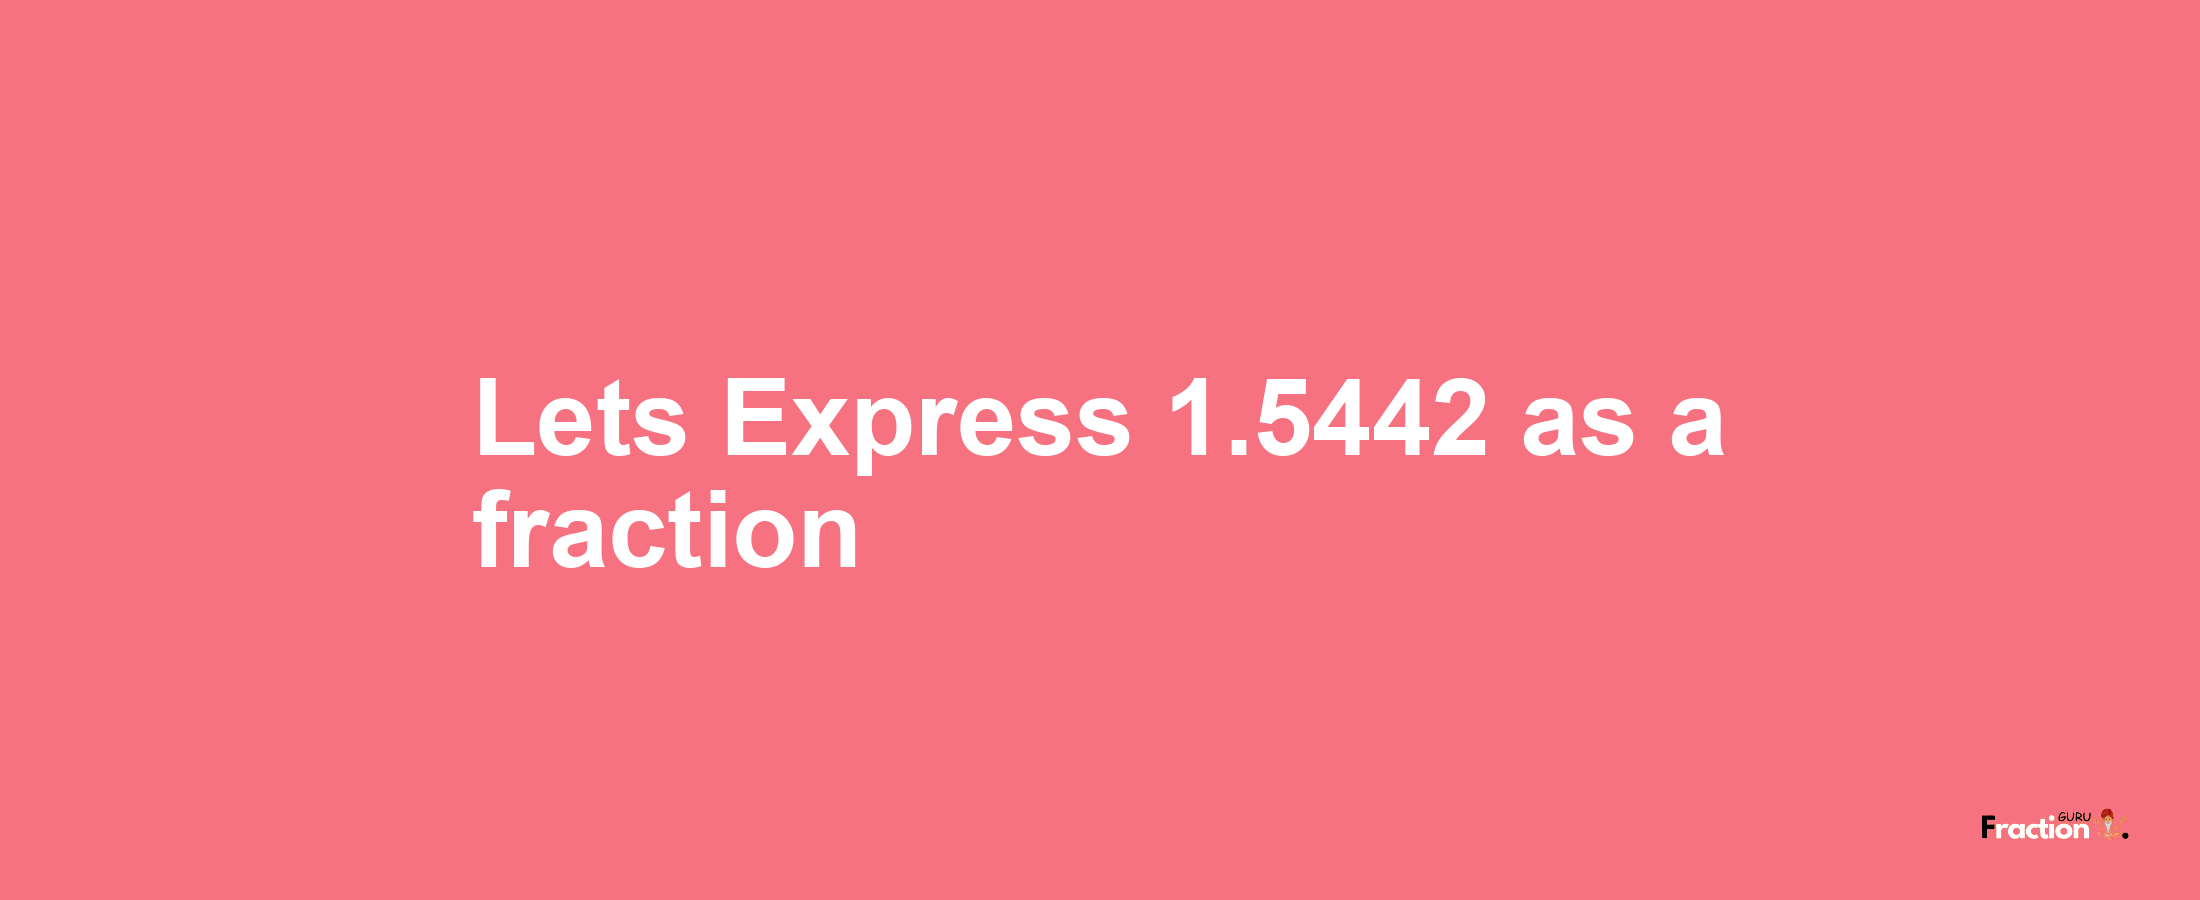 Lets Express 1.5442 as afraction